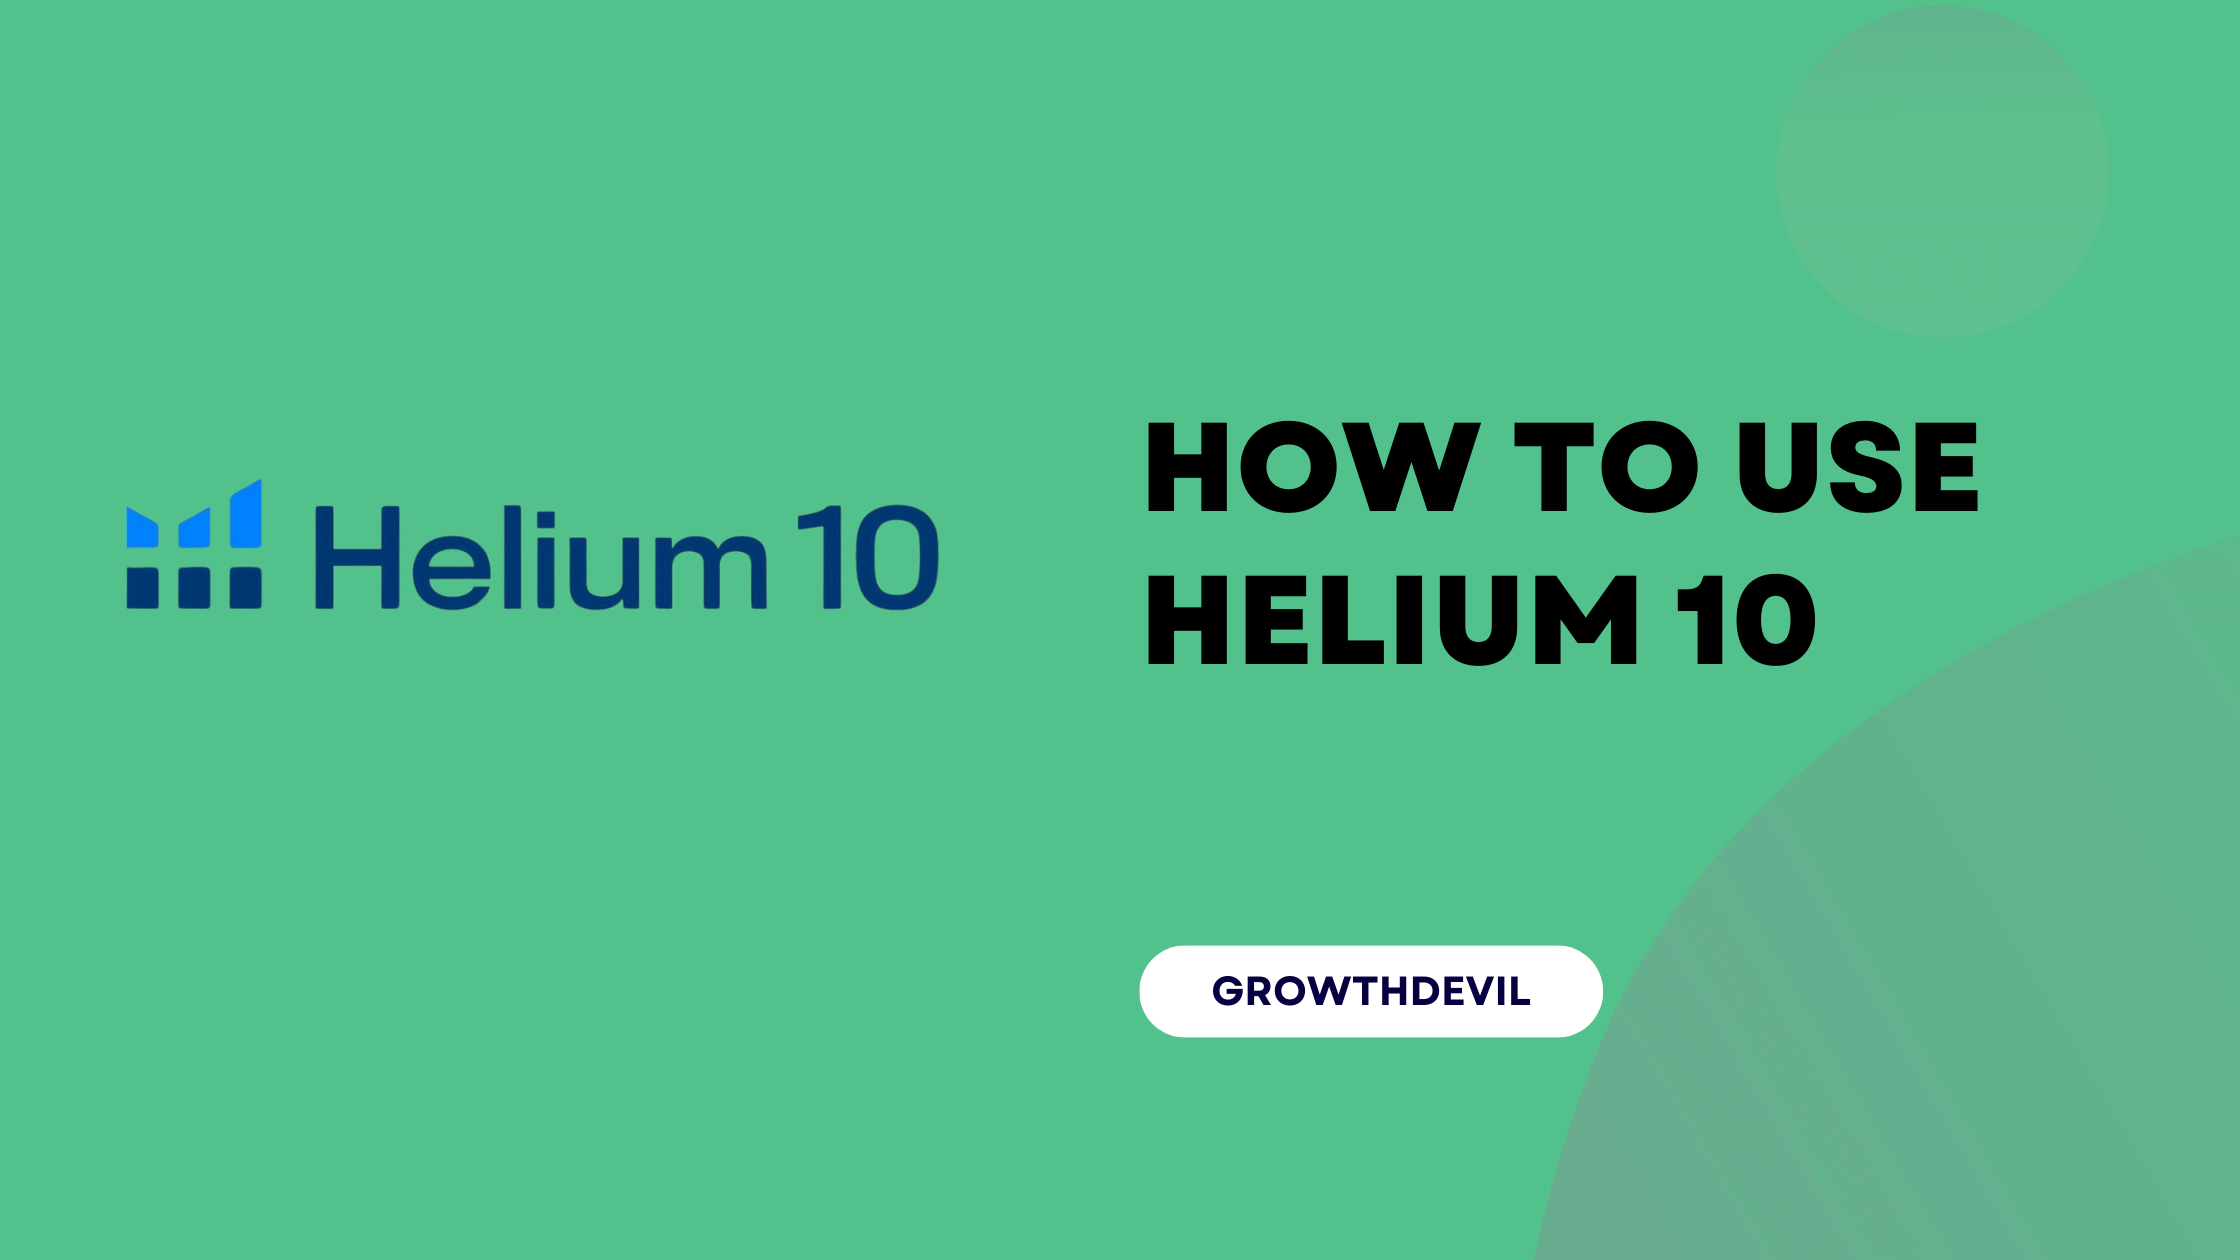 How-To-Use-Helium-10-GrowthDevil